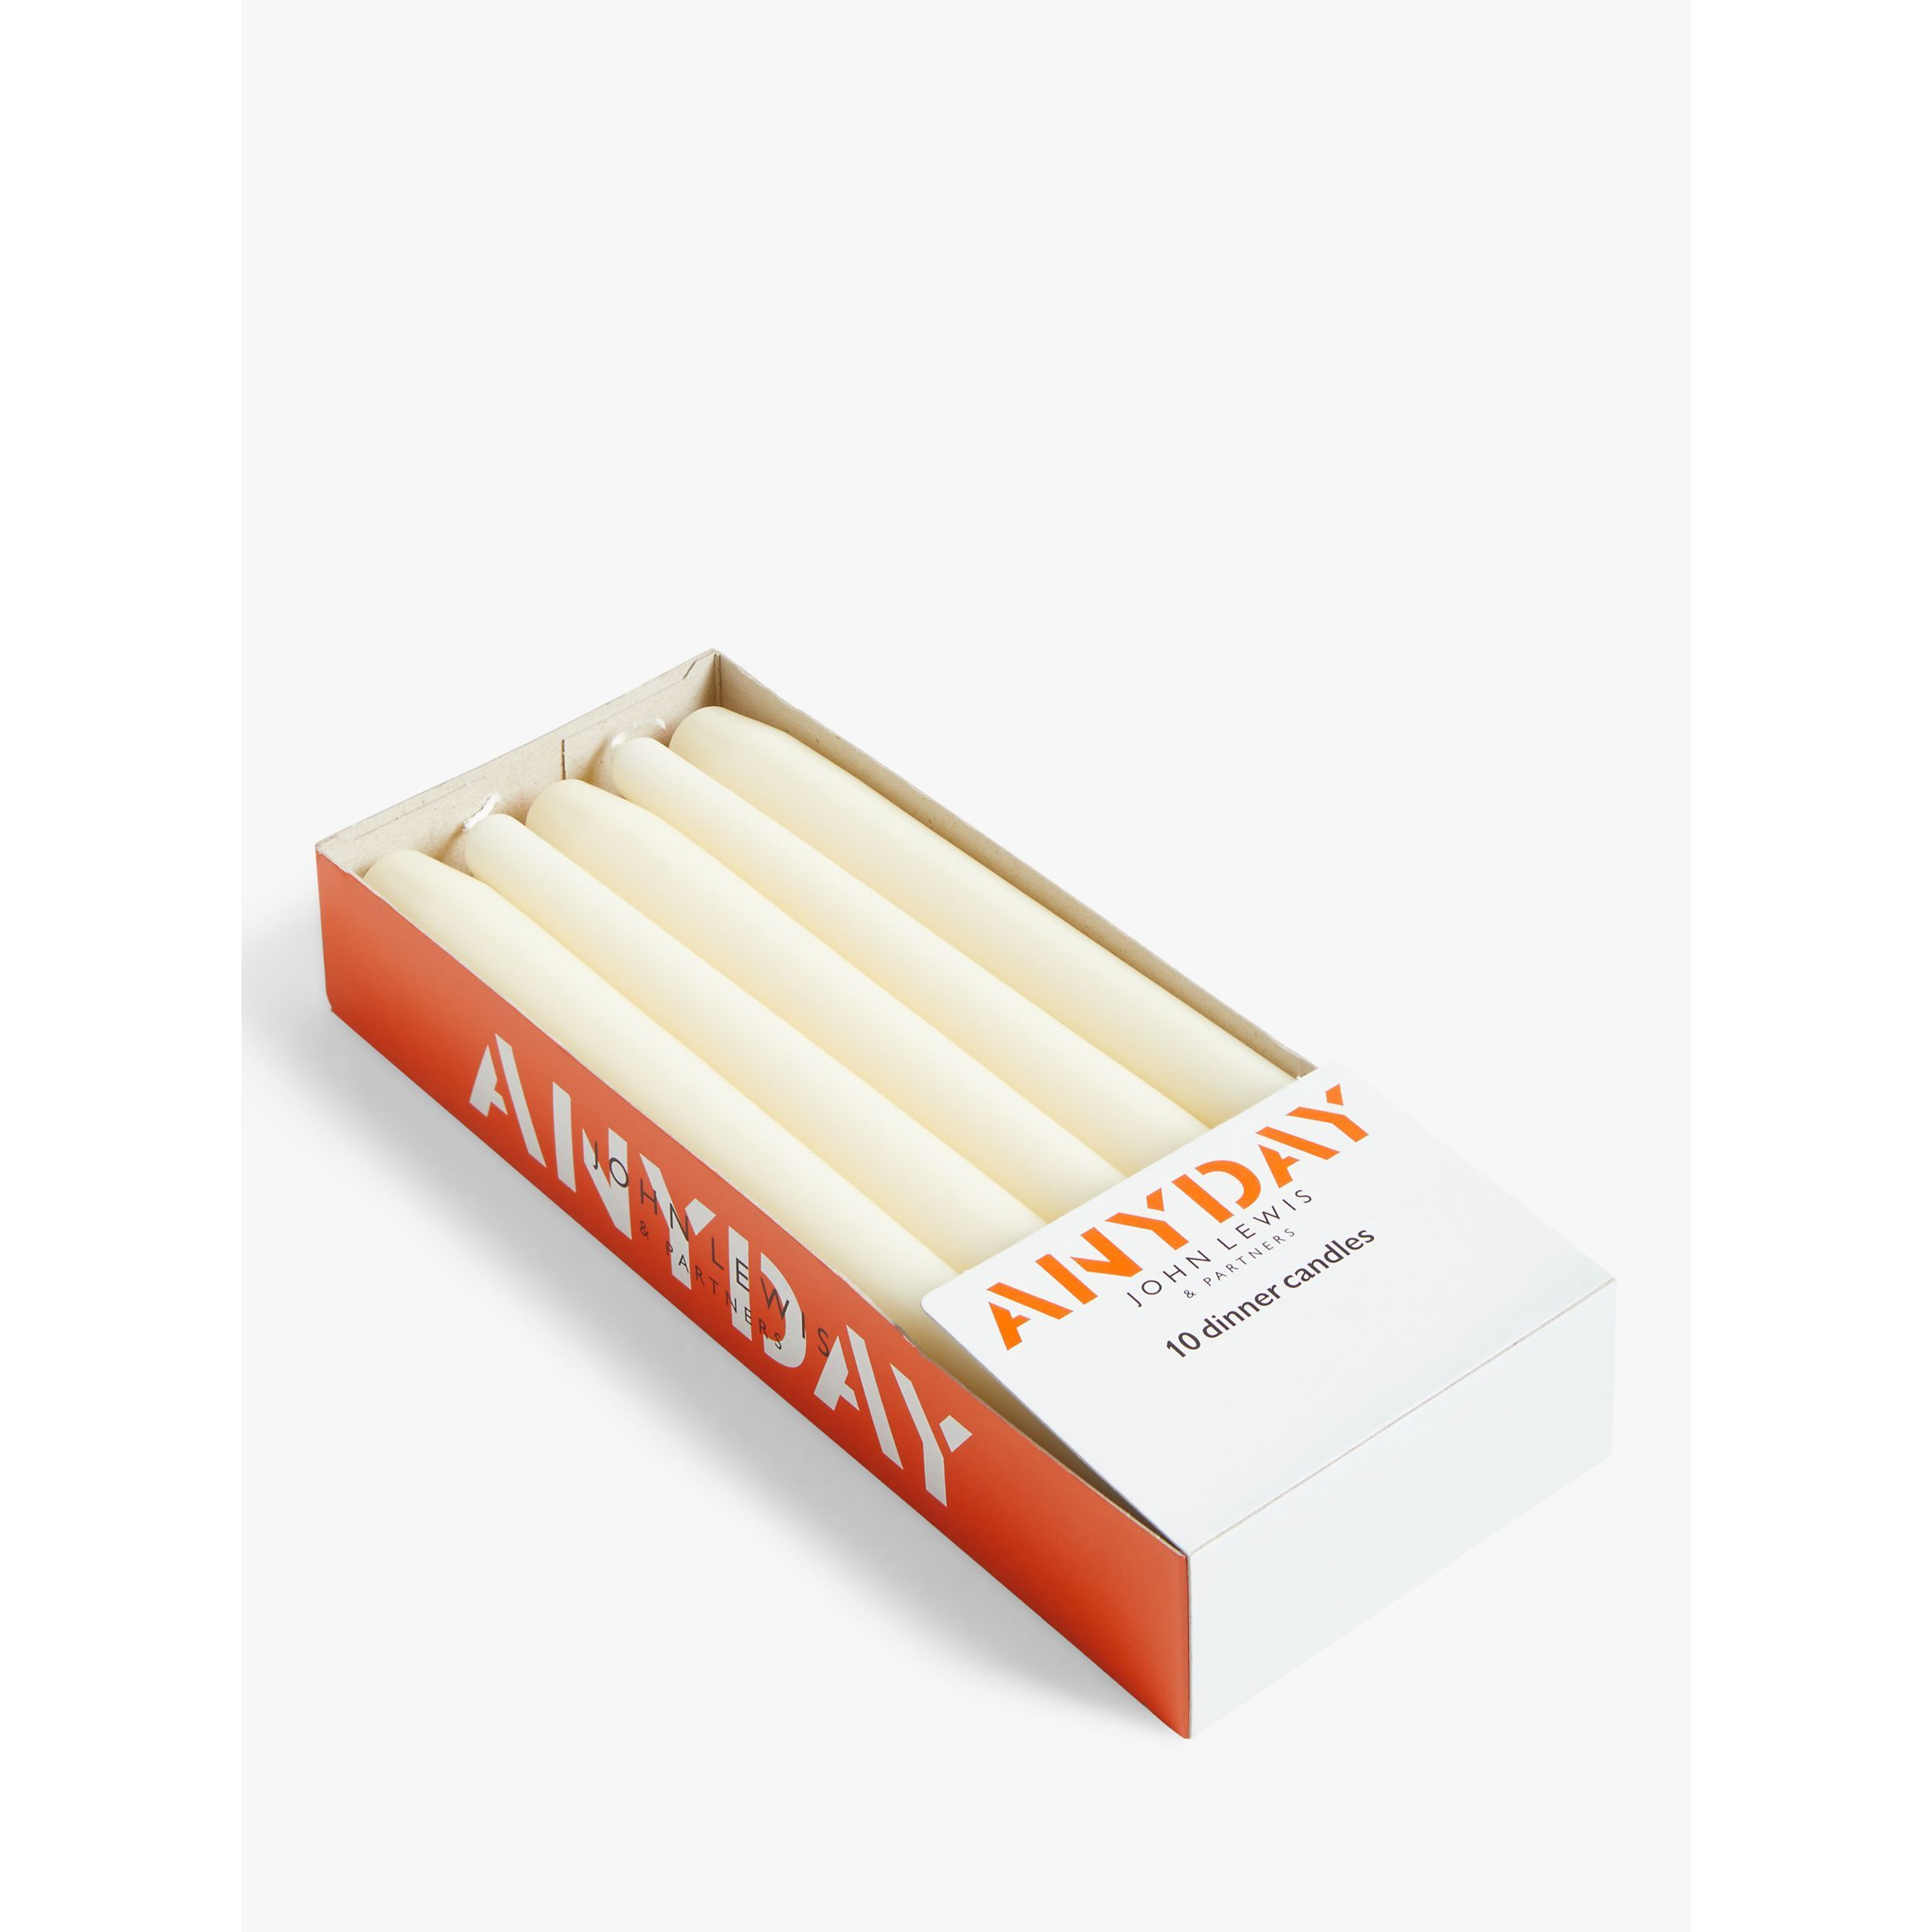 John Lewis ANYDAY Tapered Dinner Candles, Pack of 10 - image 1